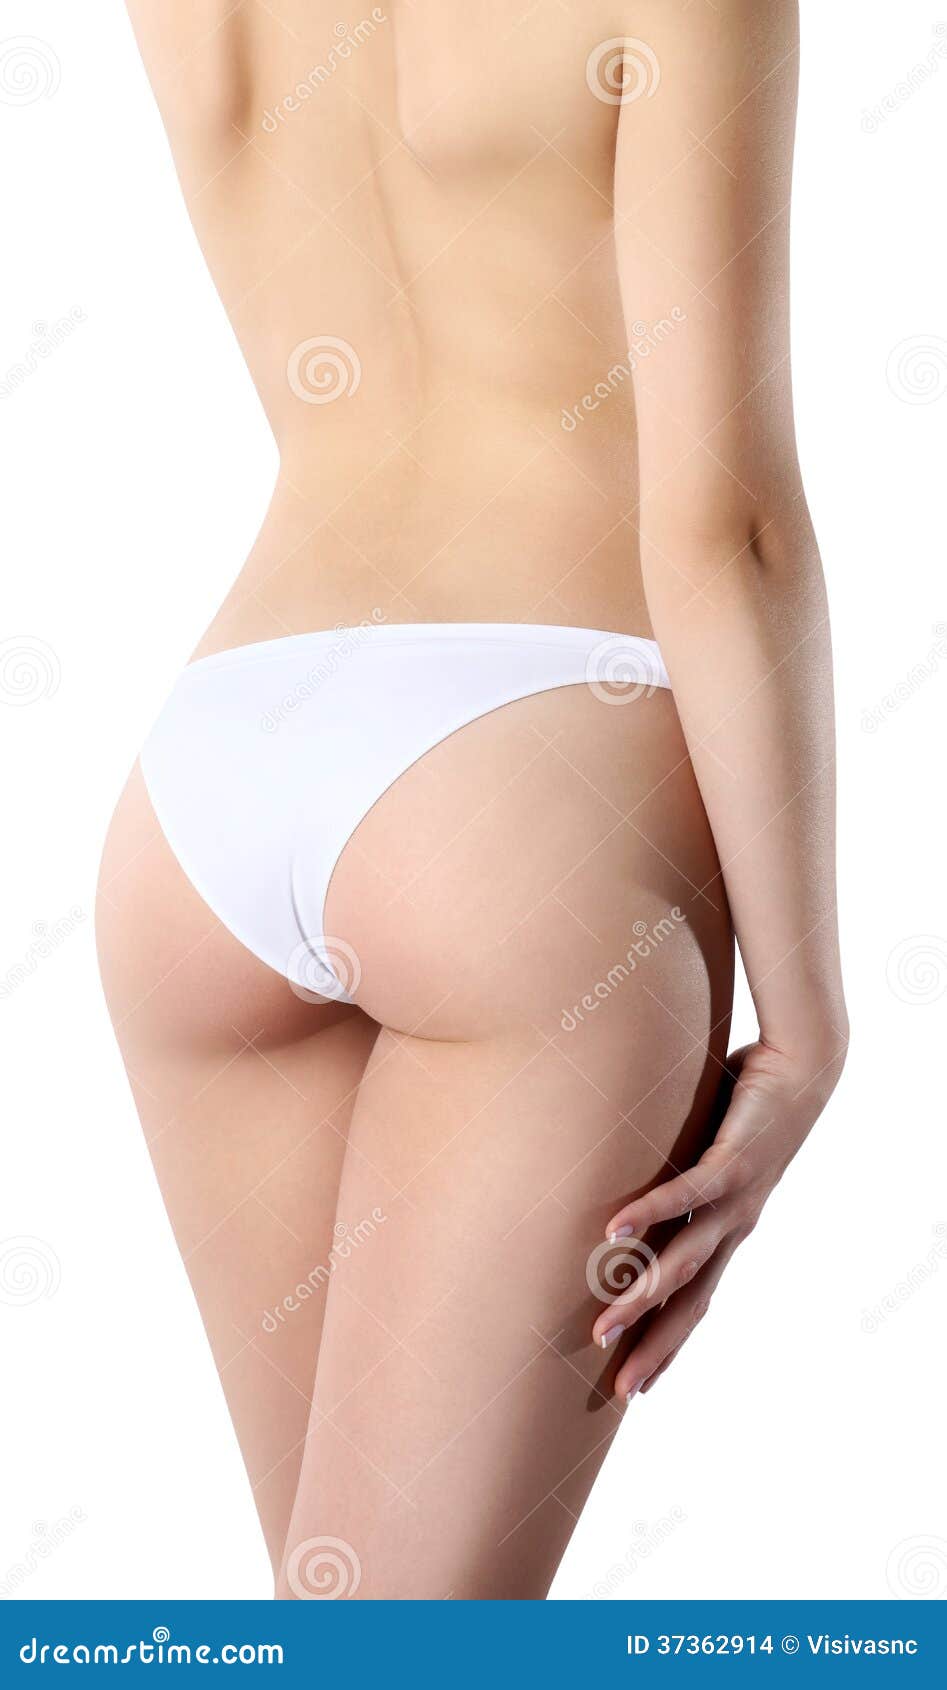 Panties Woman Bottom and Back Side Stock Photo - Image of cellulite,  figure: 37362914